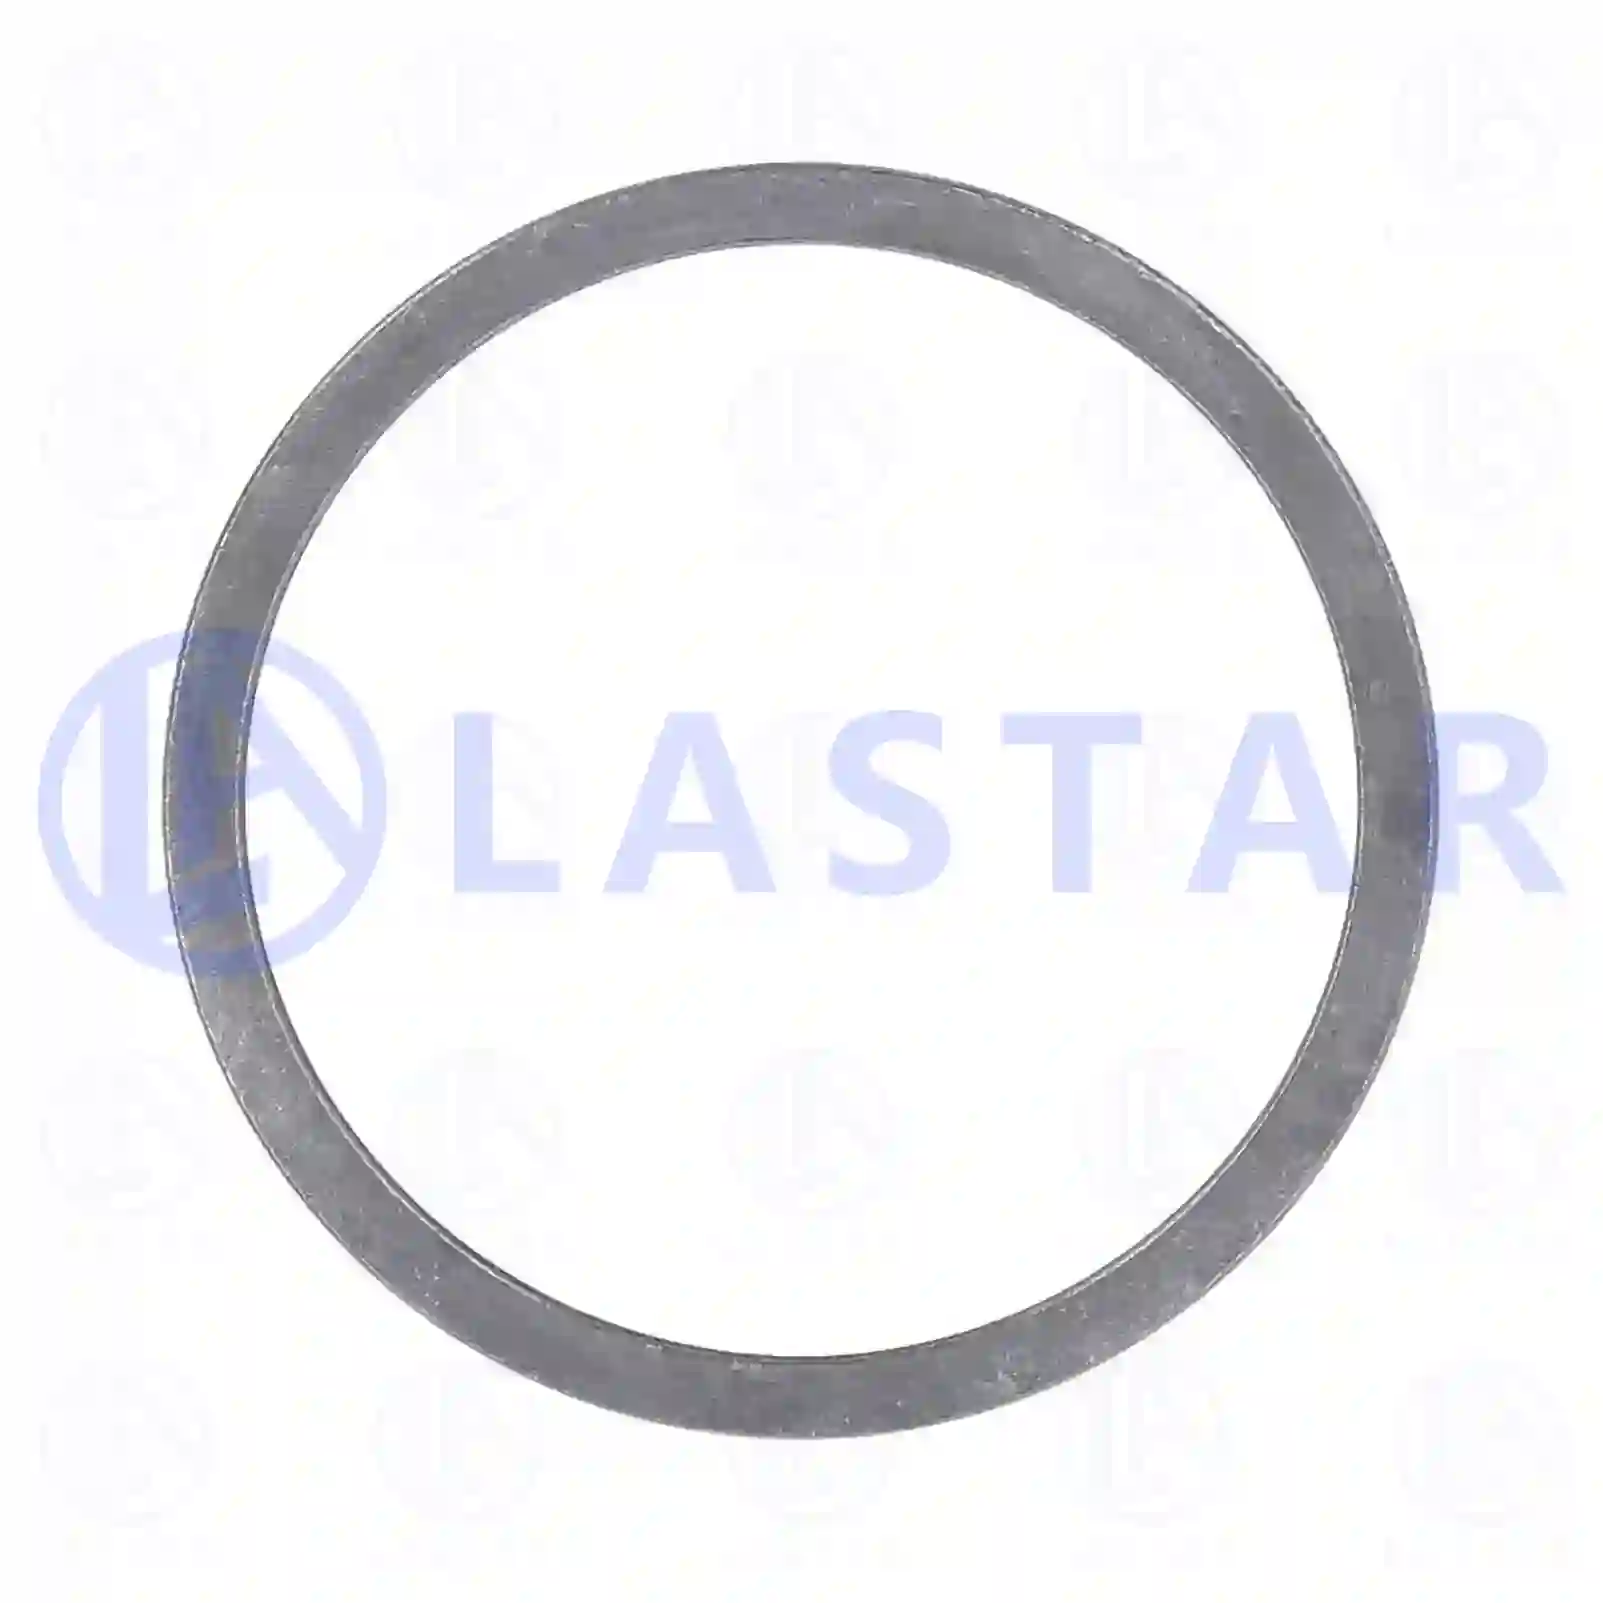 Spacer washer, 77726665, 7162287 ||  77726665 Lastar Spare Part | Truck Spare Parts, Auotomotive Spare Parts Spacer washer, 77726665, 7162287 ||  77726665 Lastar Spare Part | Truck Spare Parts, Auotomotive Spare Parts